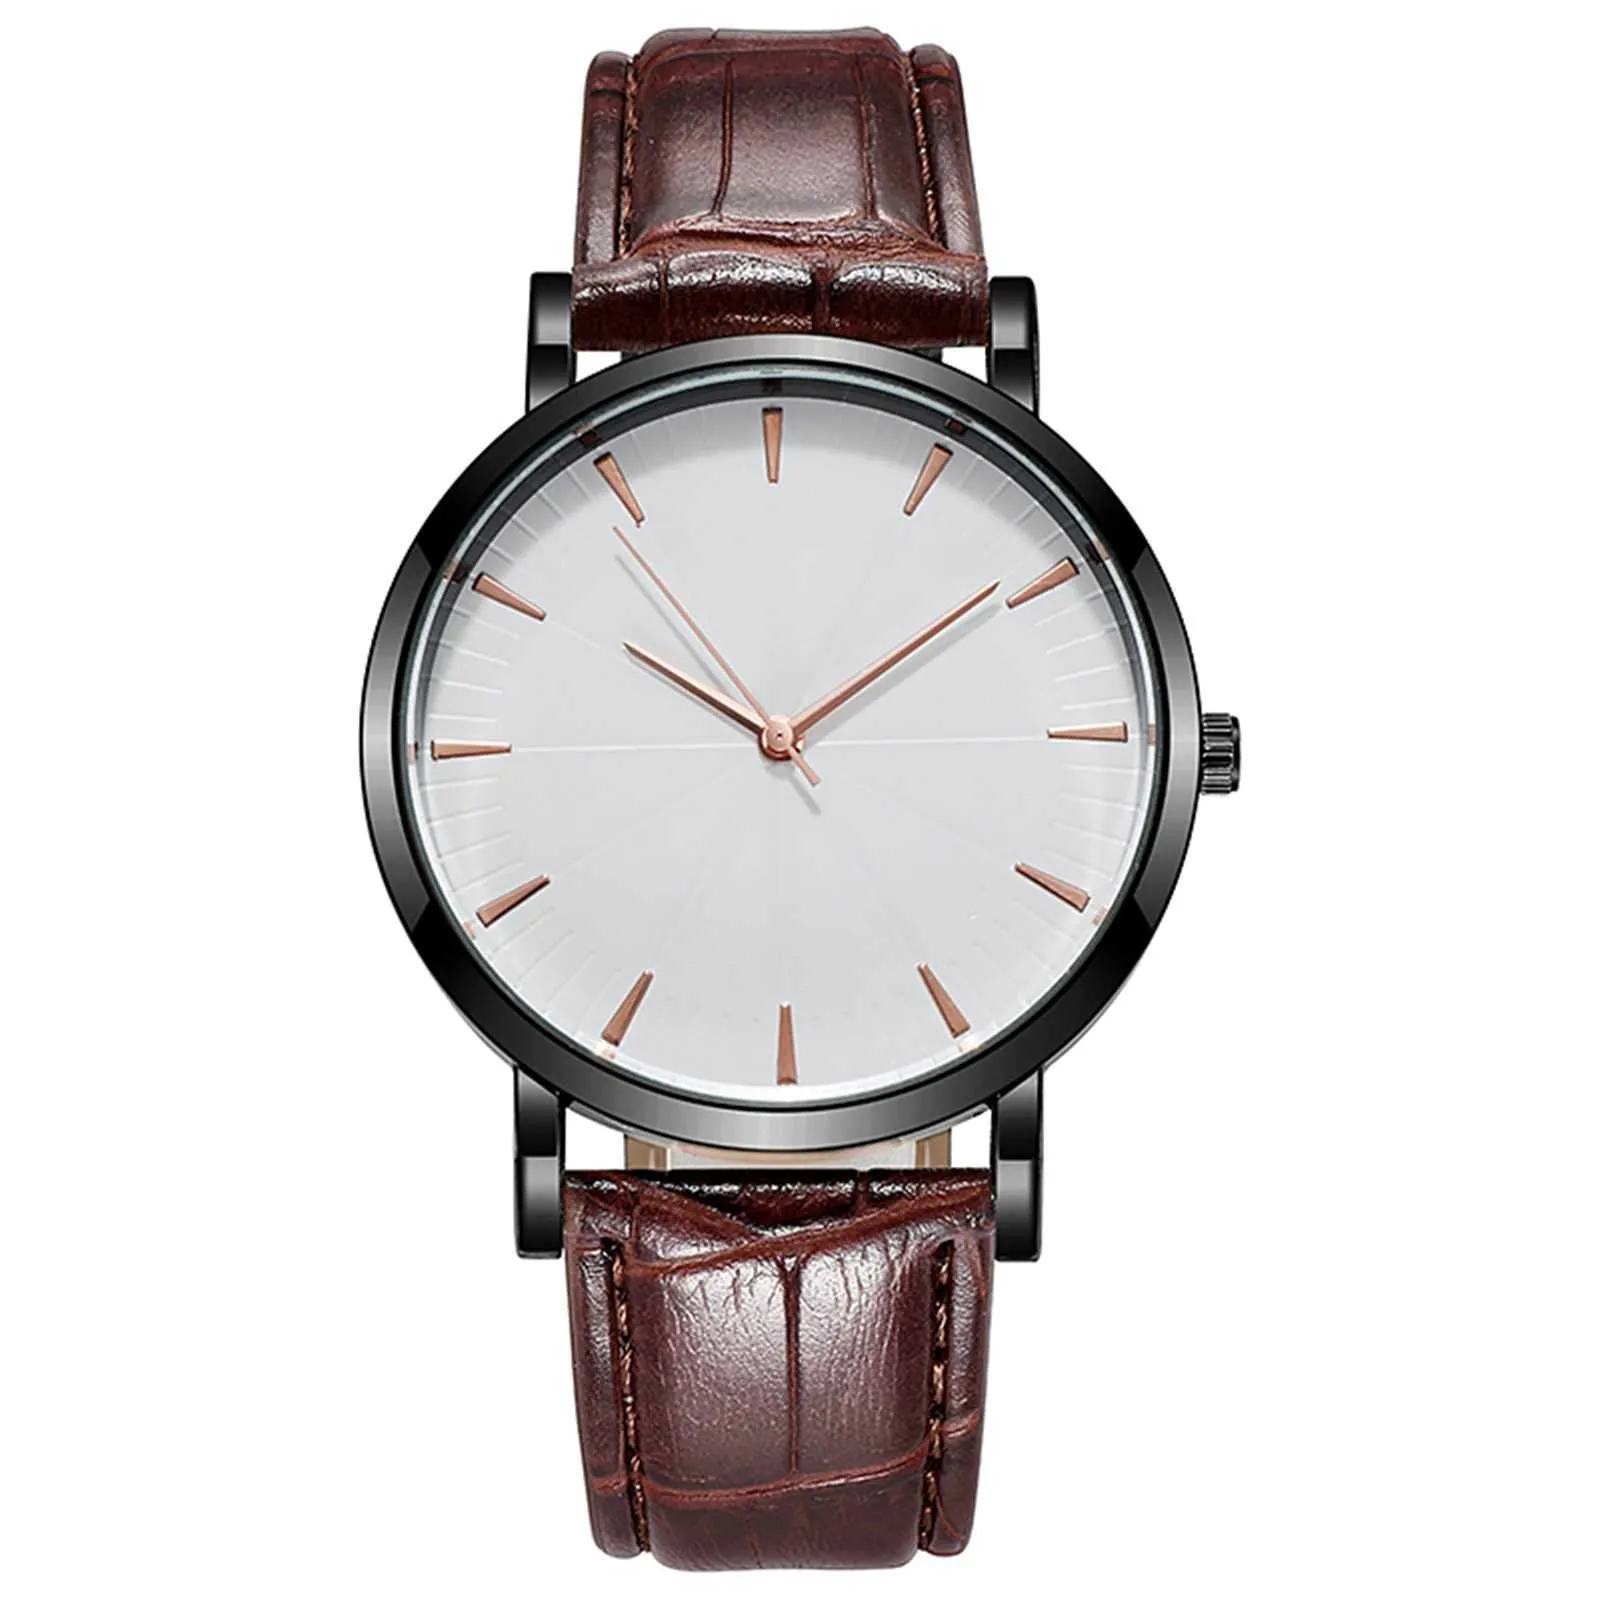 Quartz Watch Round Dial Simple Retro Leather Strap for Men Business Fashion Casual Outdoor Wristwatch